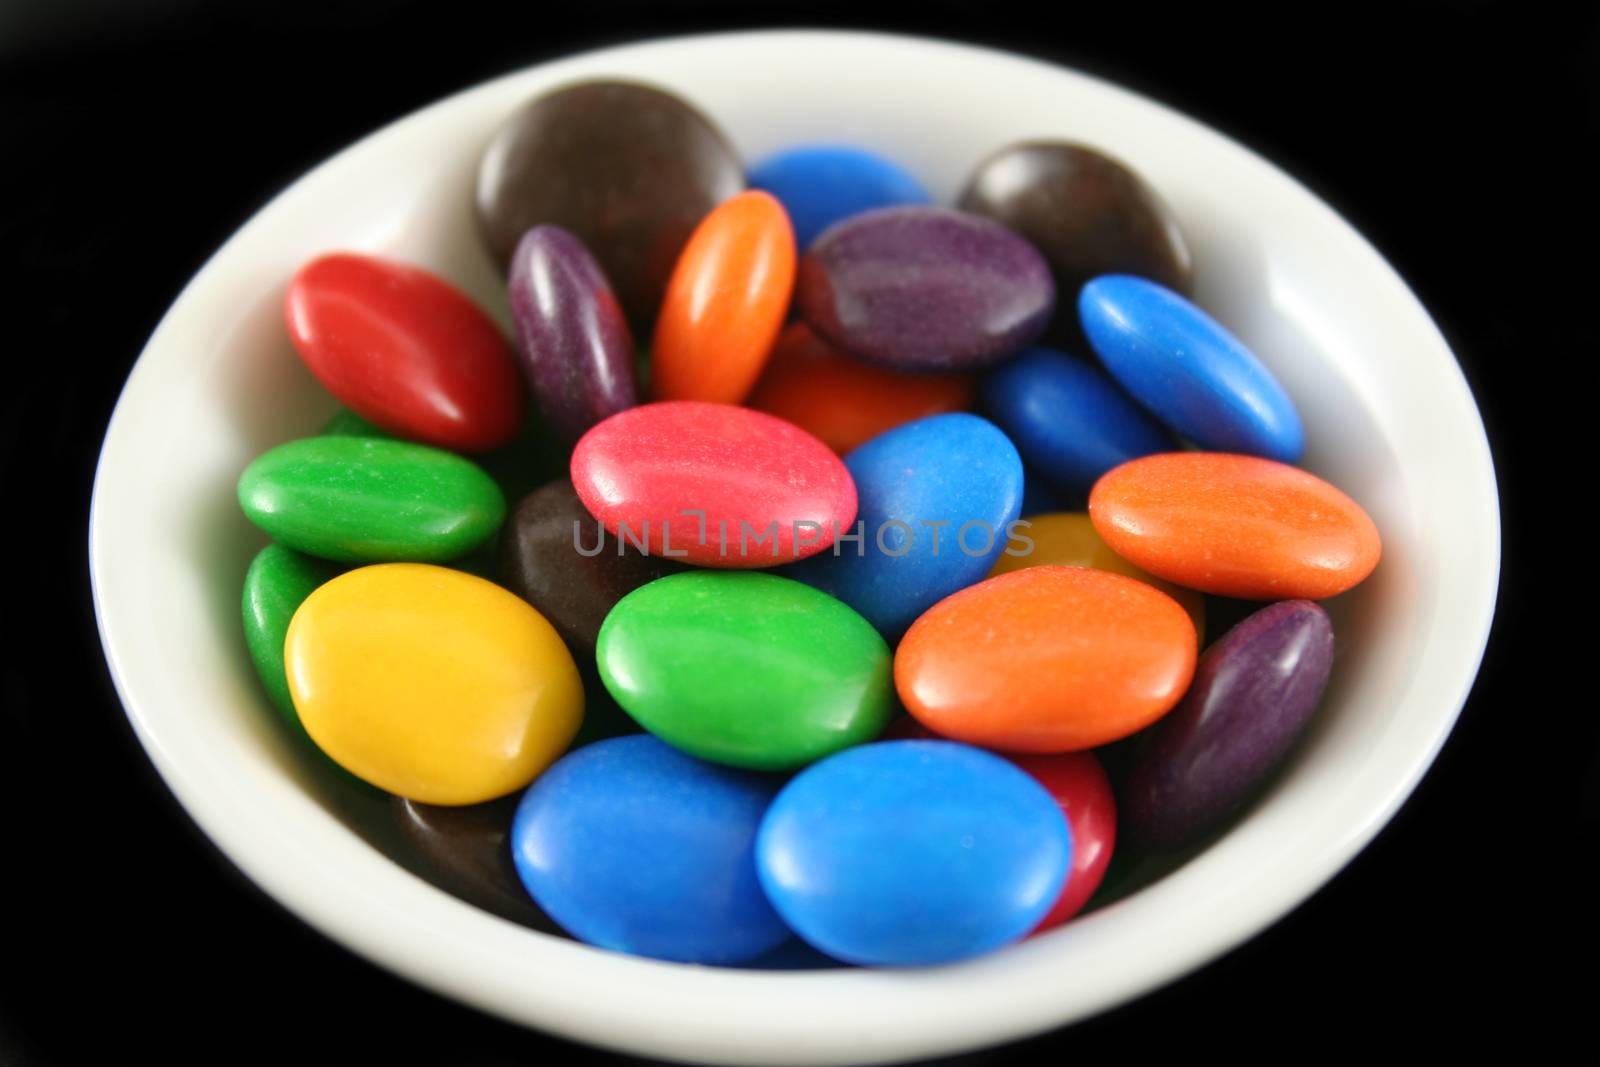 Assorted crunchy and colorful chocolate buttons.